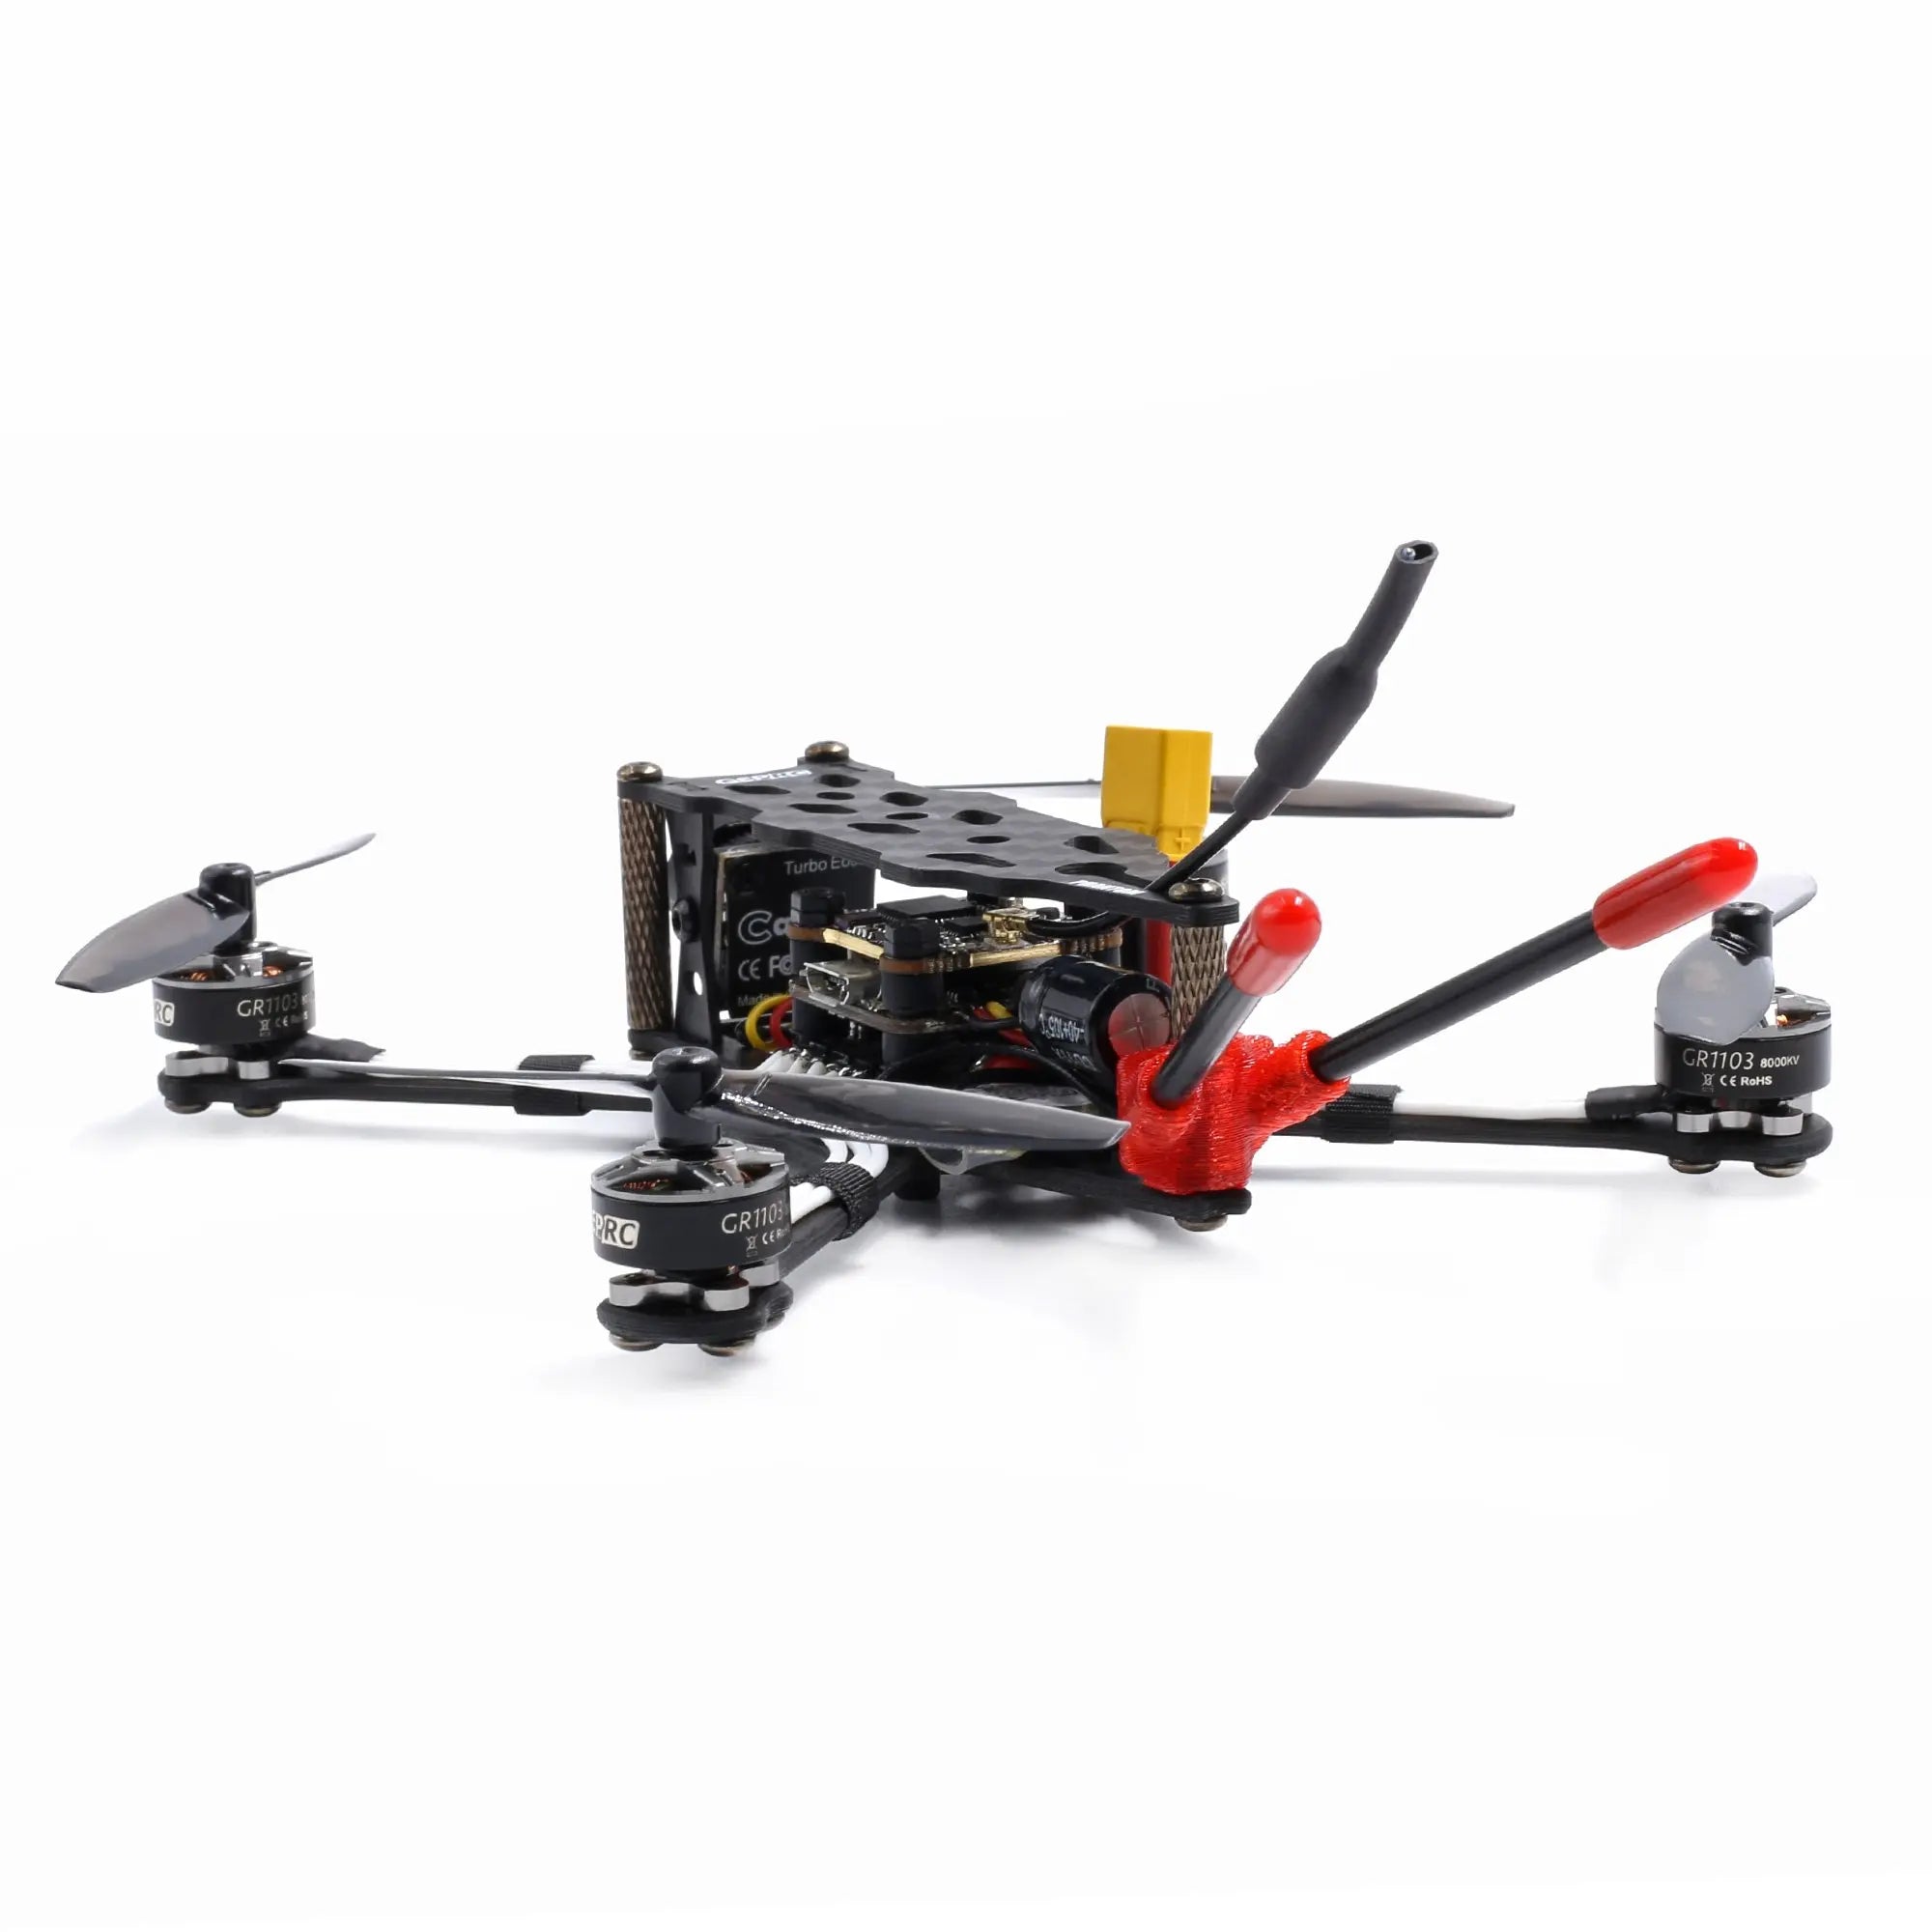 GEPRC SMART Toothpick, PHANTOM is a super mini freestyle quad, 2.5inch propeller and 